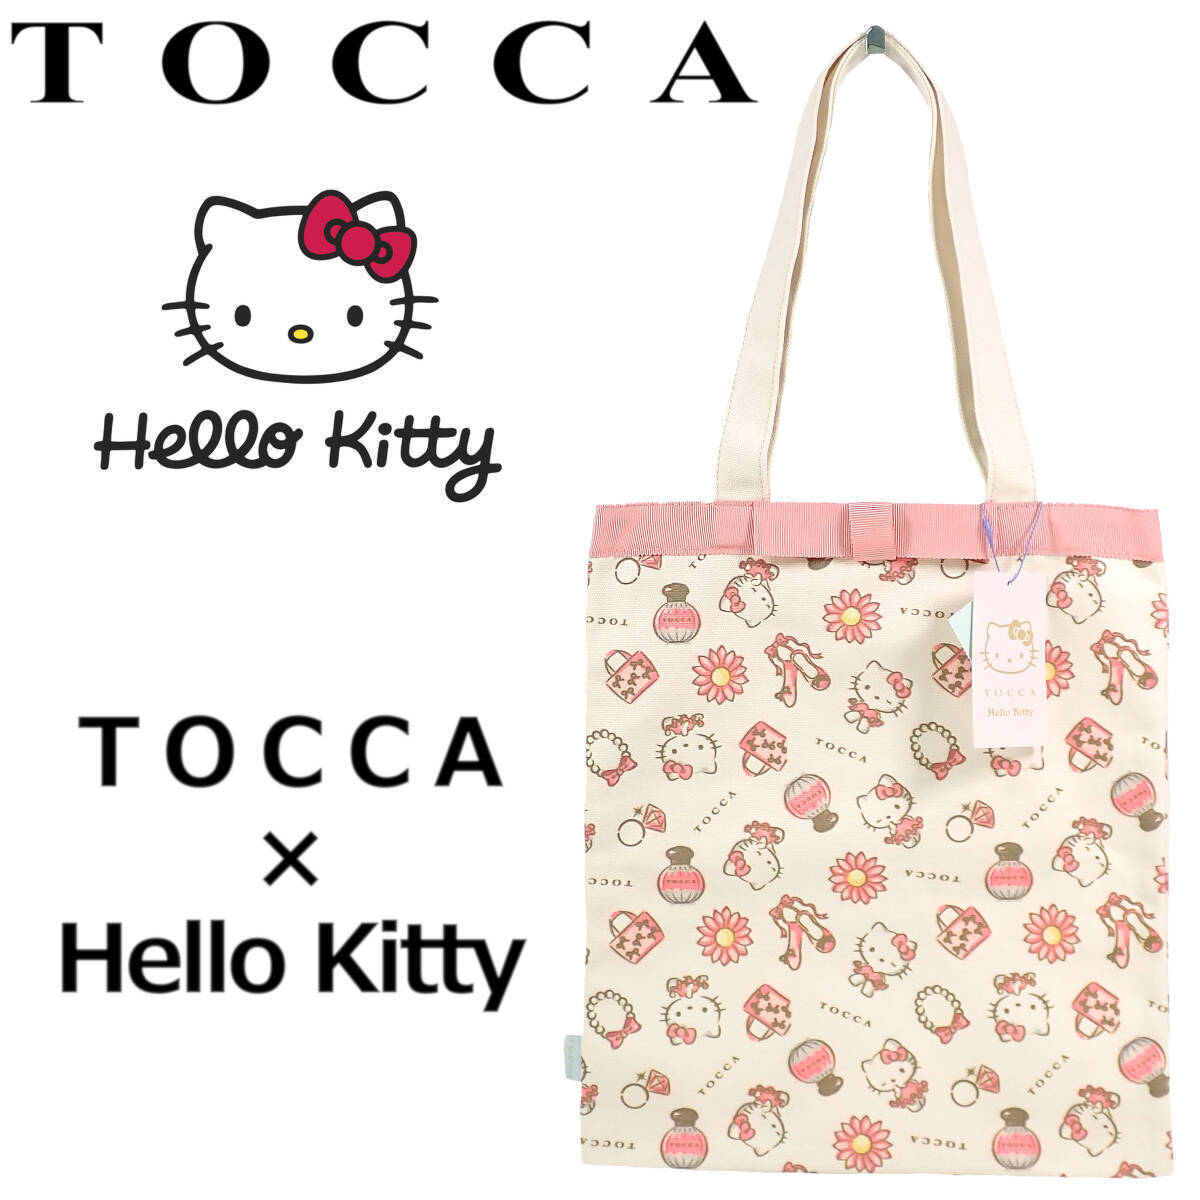 Tocca Hello Kitty Collaboration A4 Tote Bag Width 27cm Height 31cm Onward Kashiy